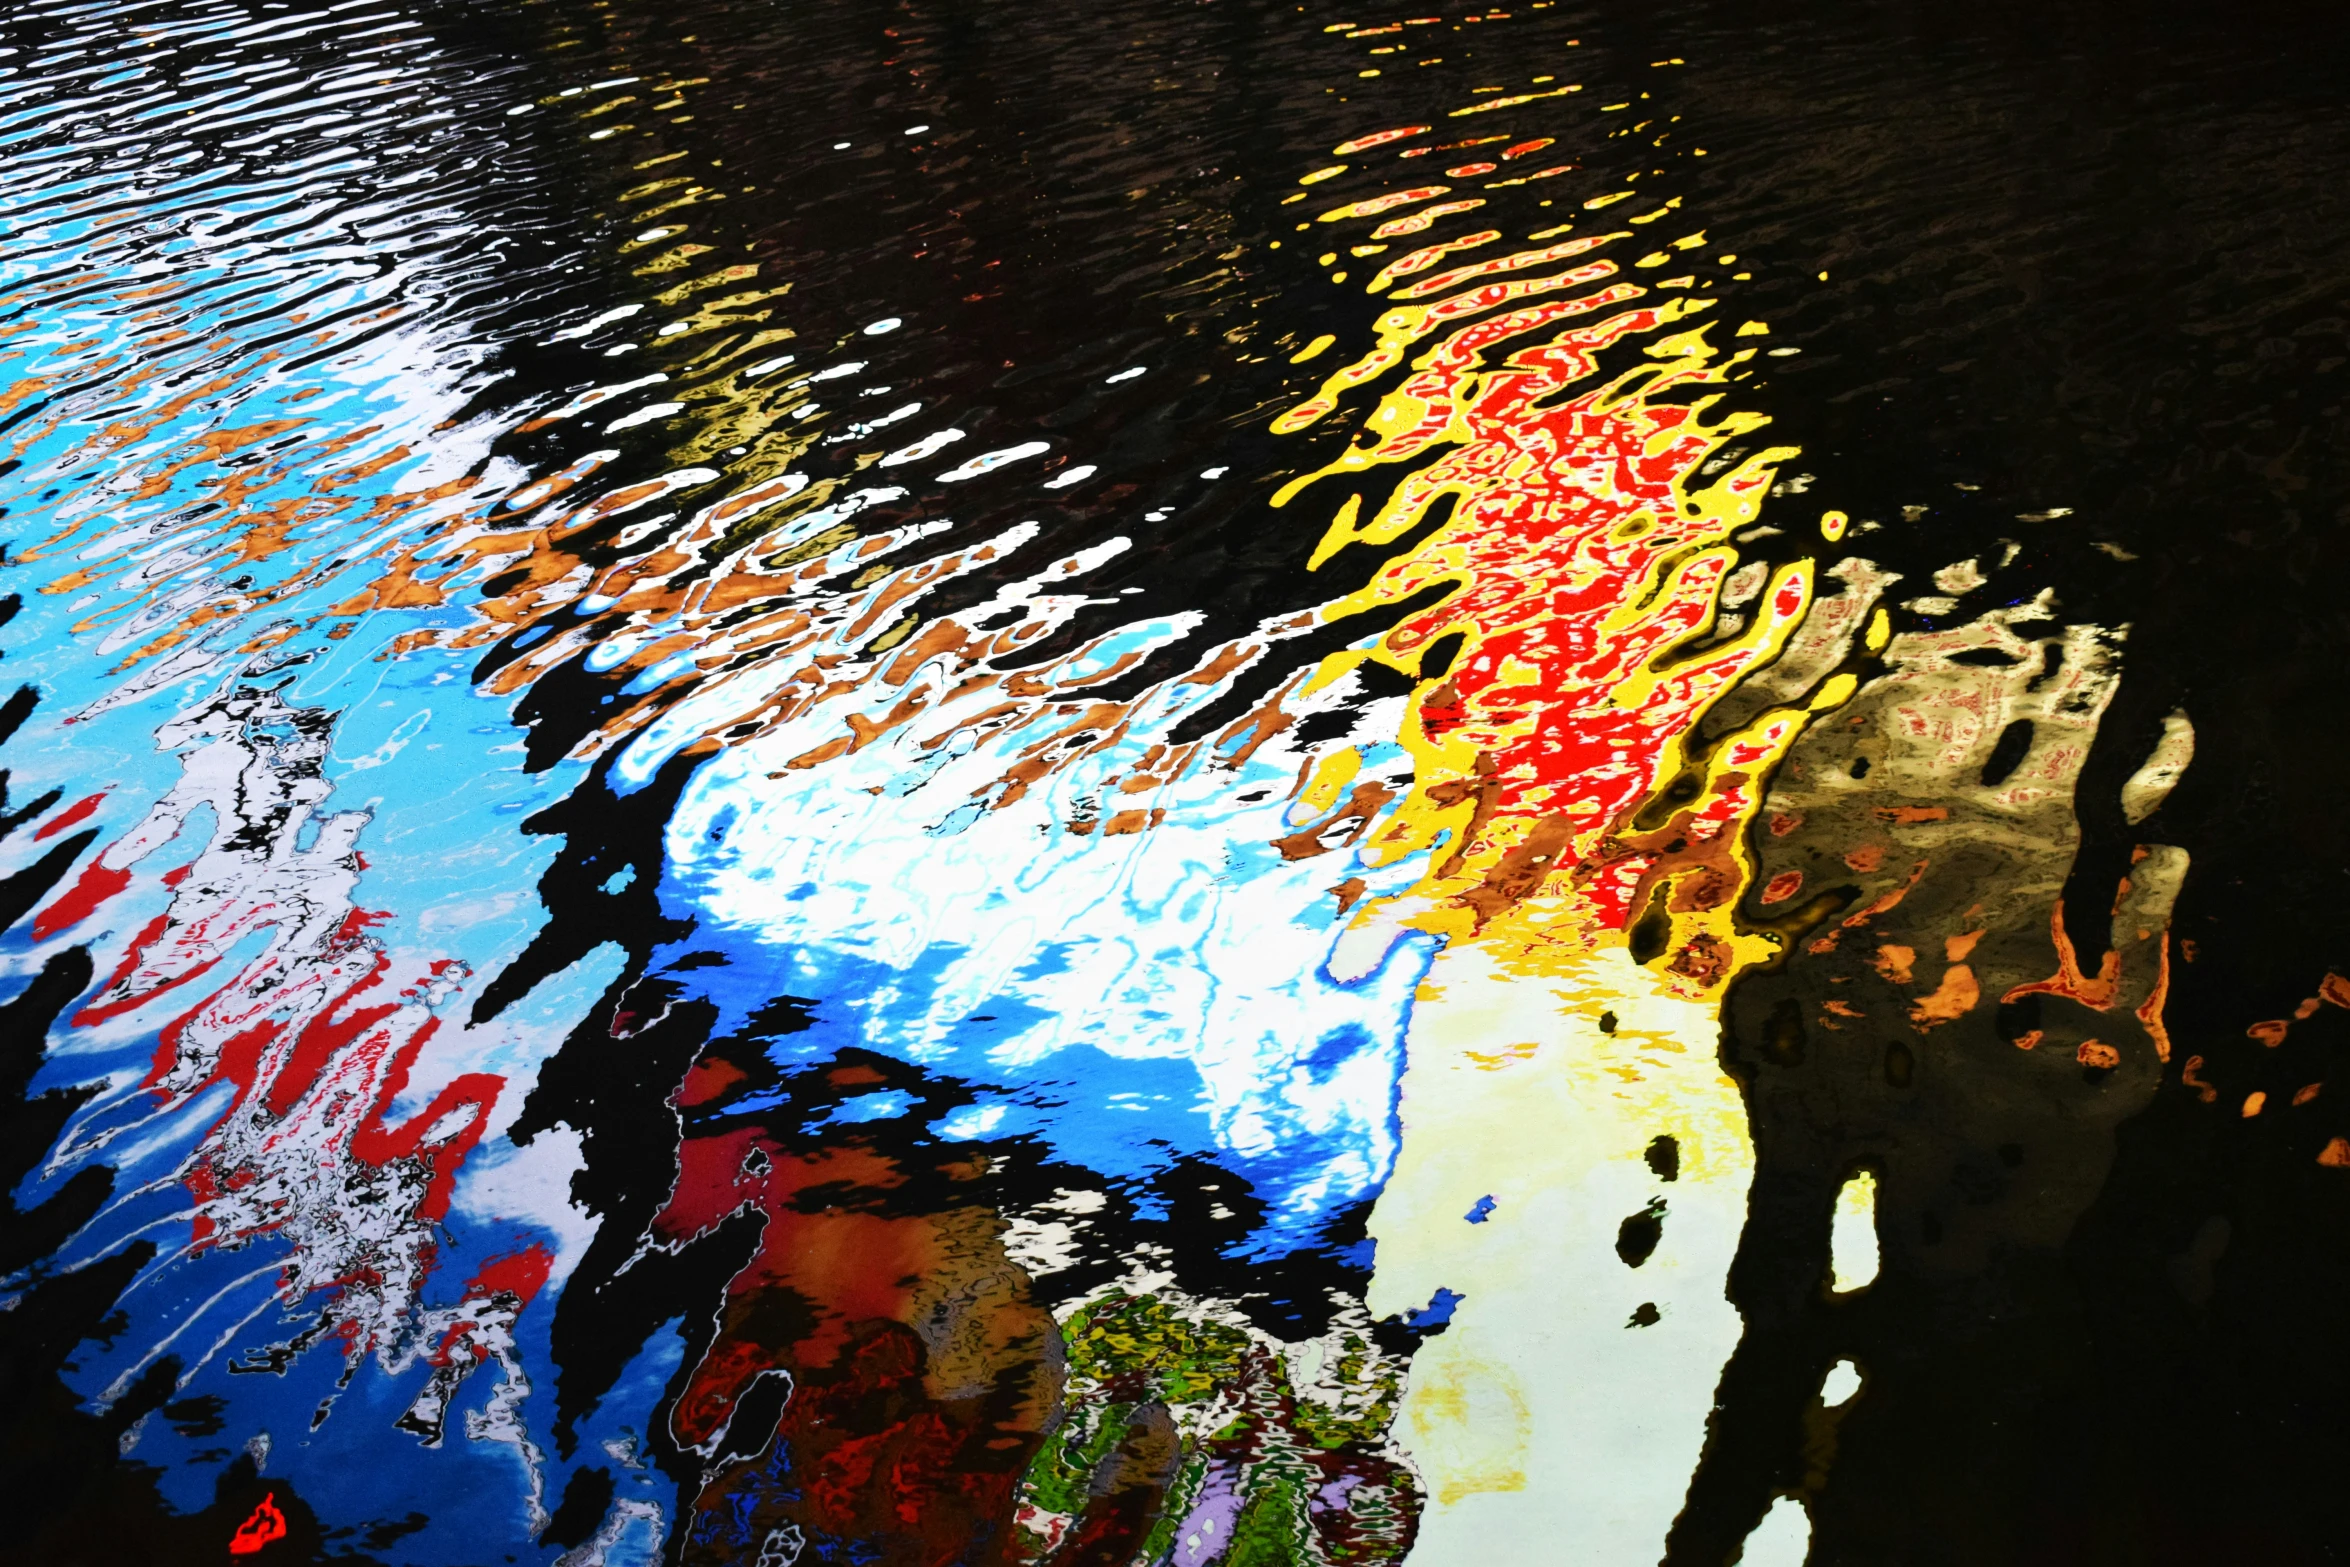 many different colored reflections on water in front of a brick wall